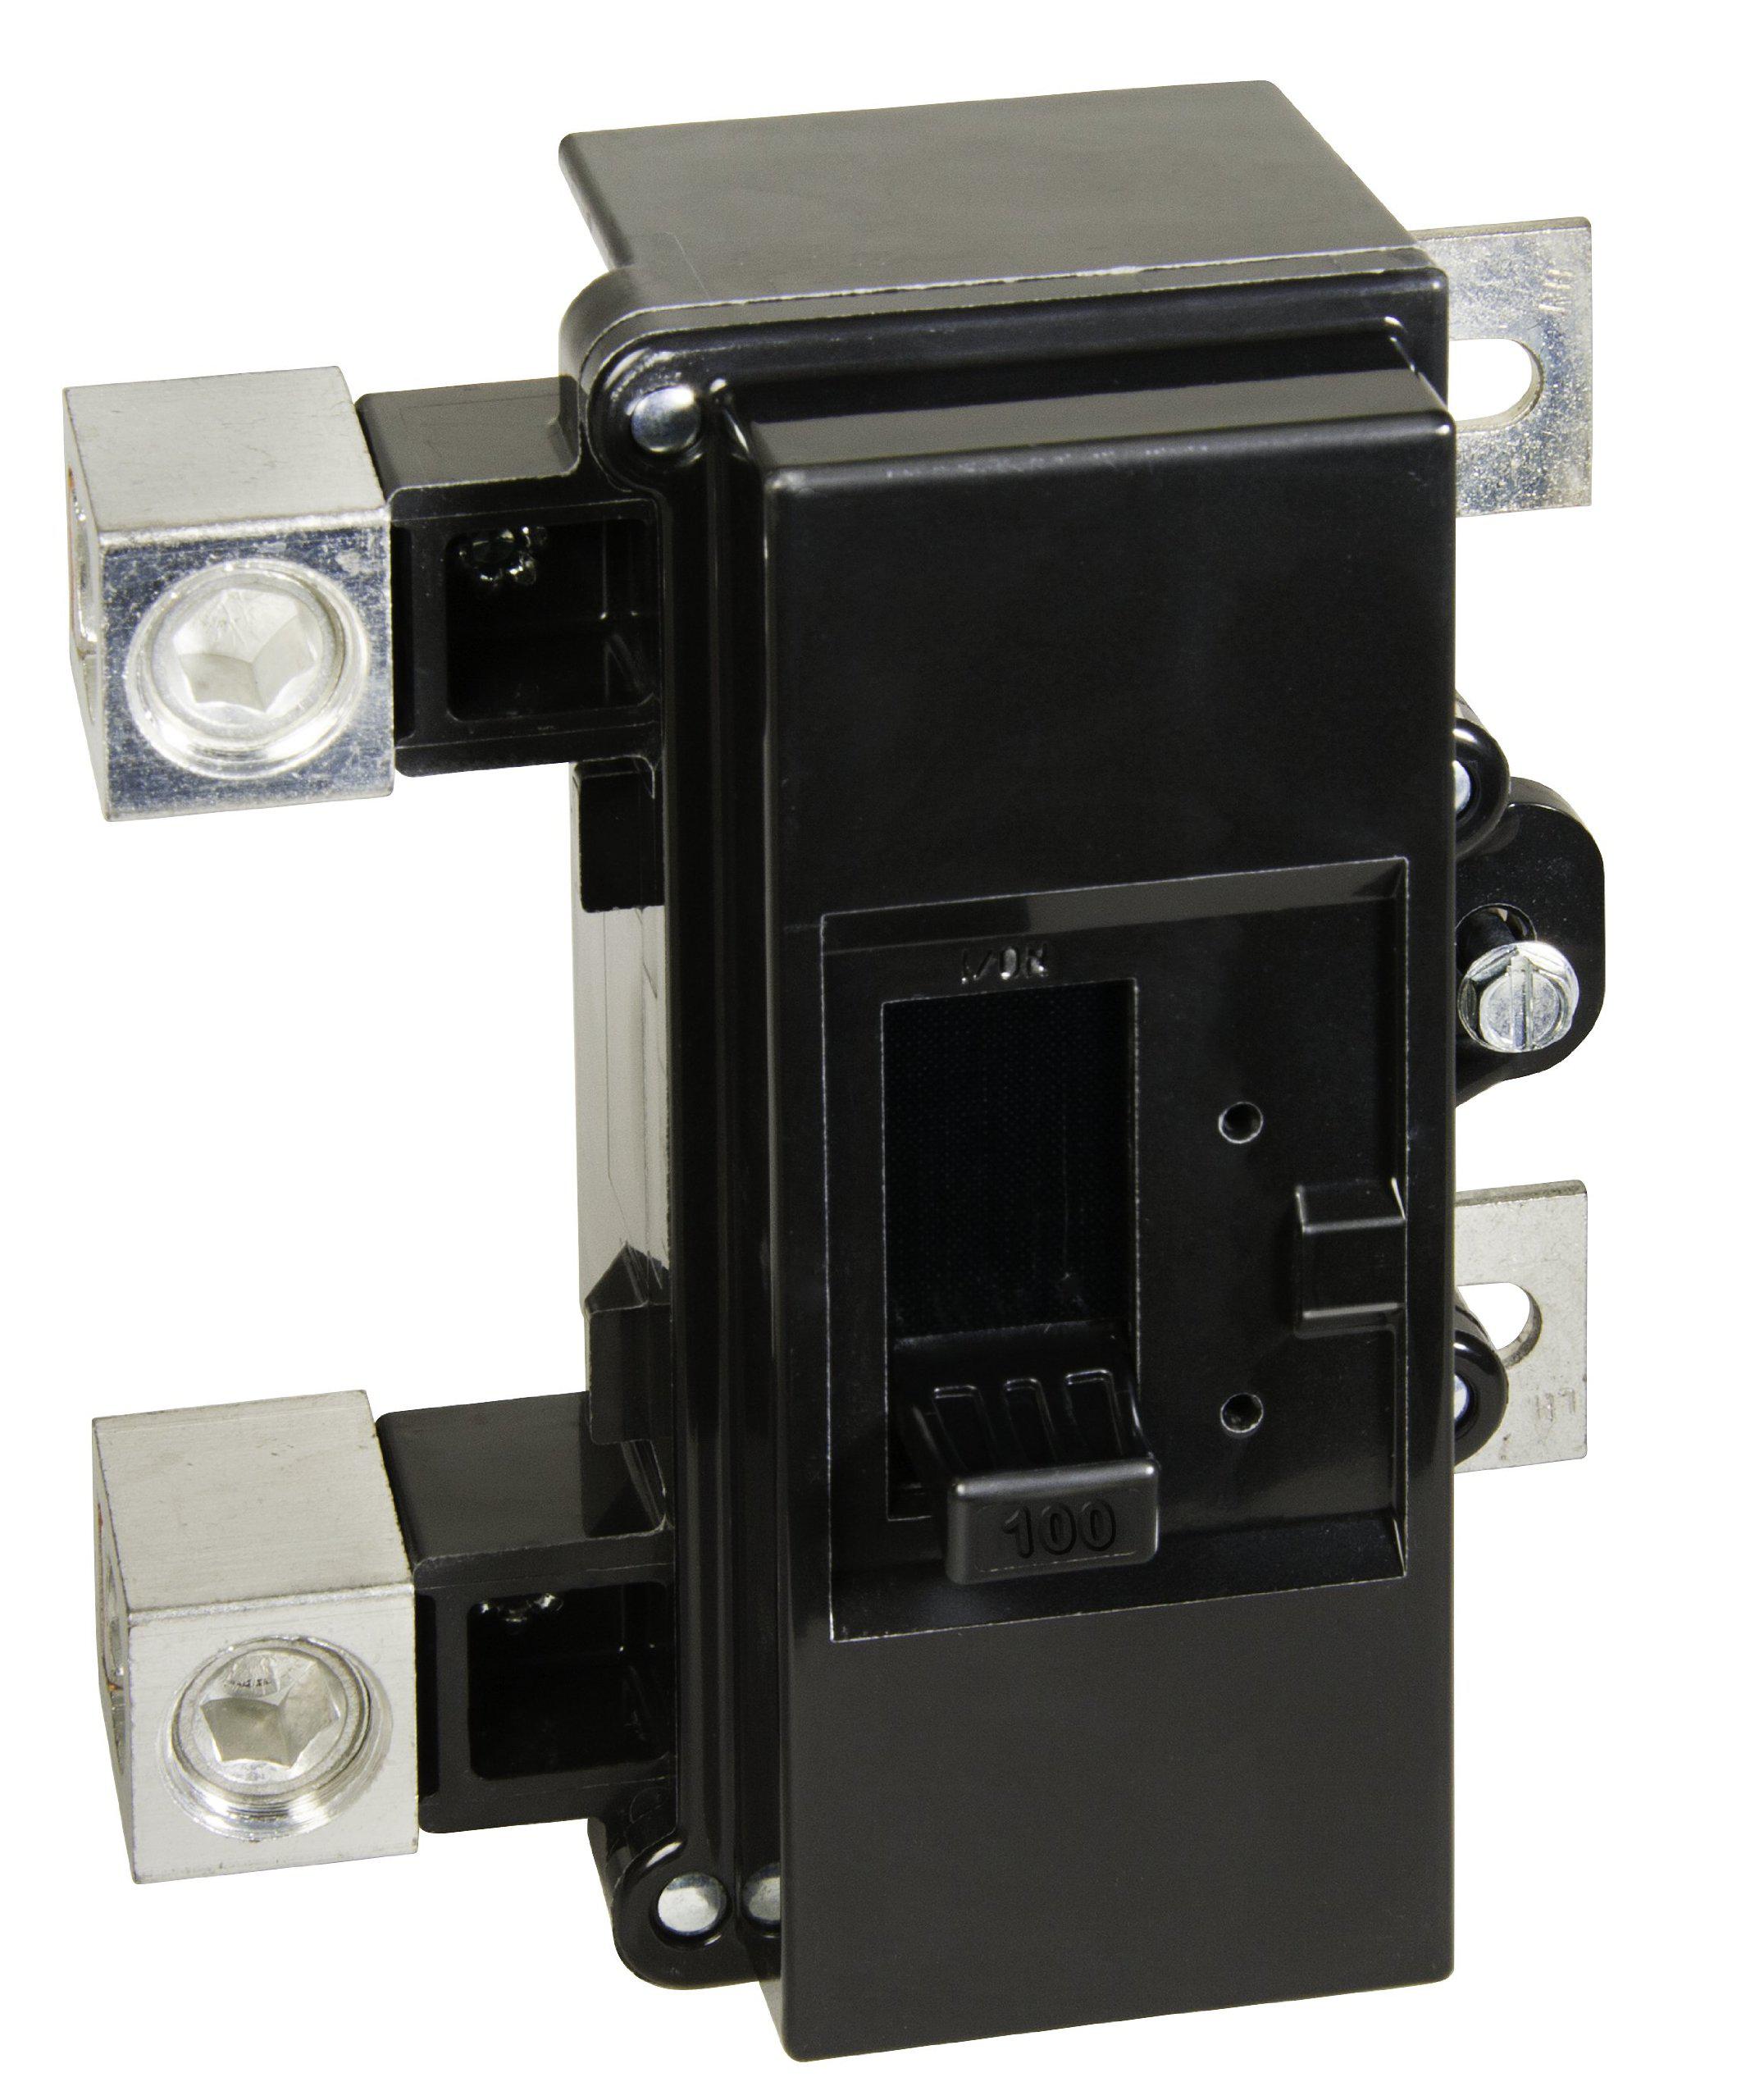 Square D by Schneider Electric square d - qom2100vh 100-amp qom2 frame size main circuit breaker for qo and homeline load centers,